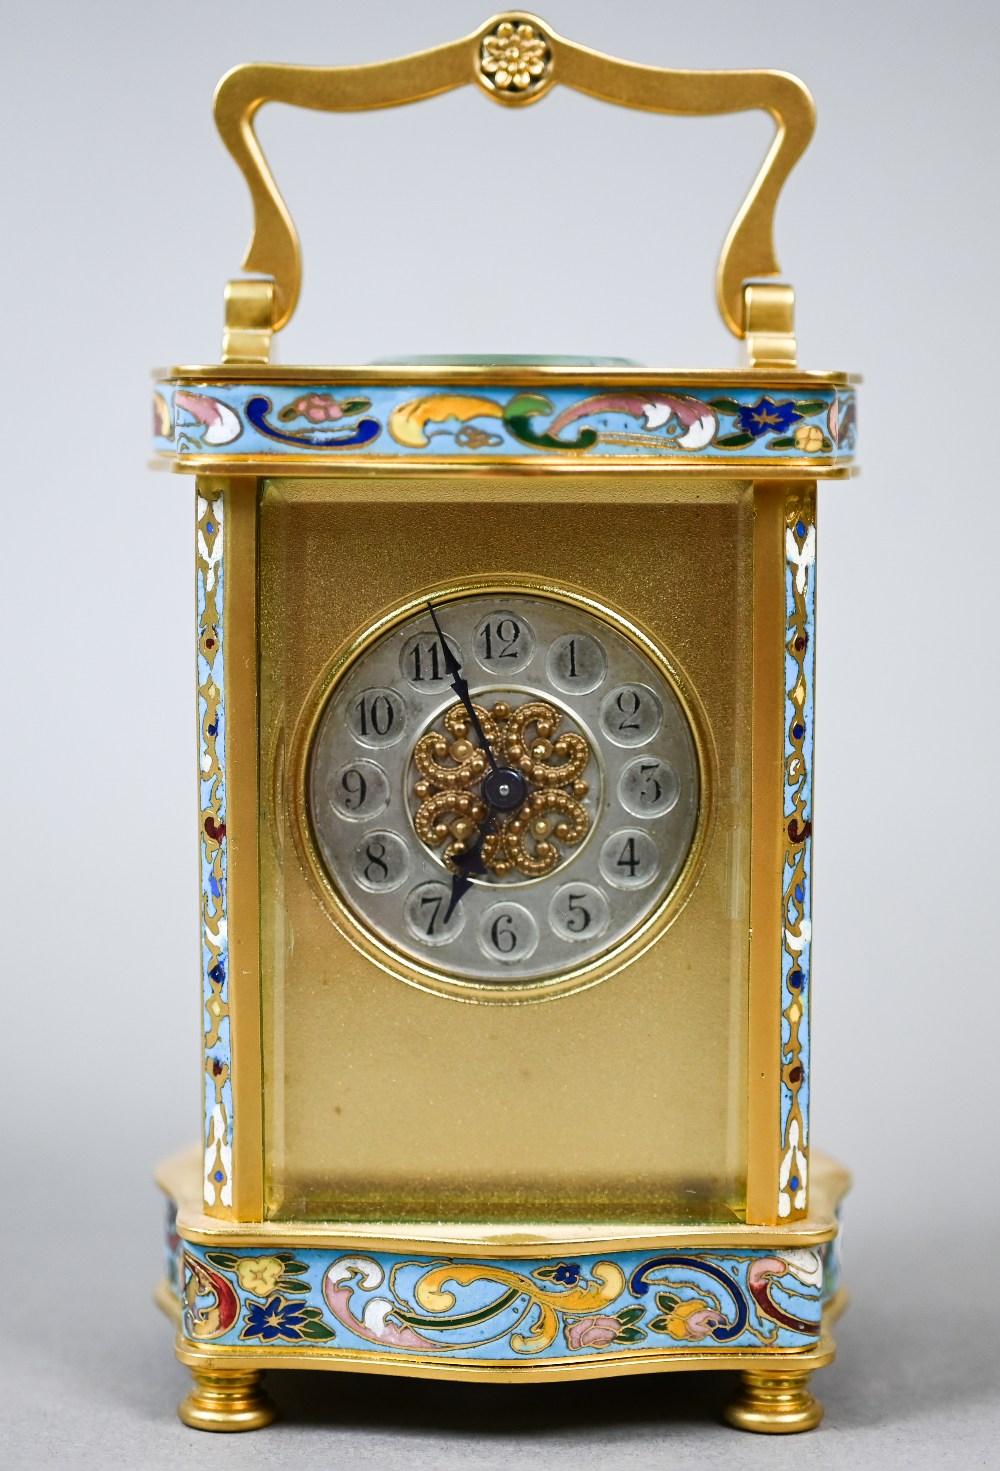 A French cloisonné panelled gilt carriage clock with single drum movement, 13.5 cm high - Image 3 of 7